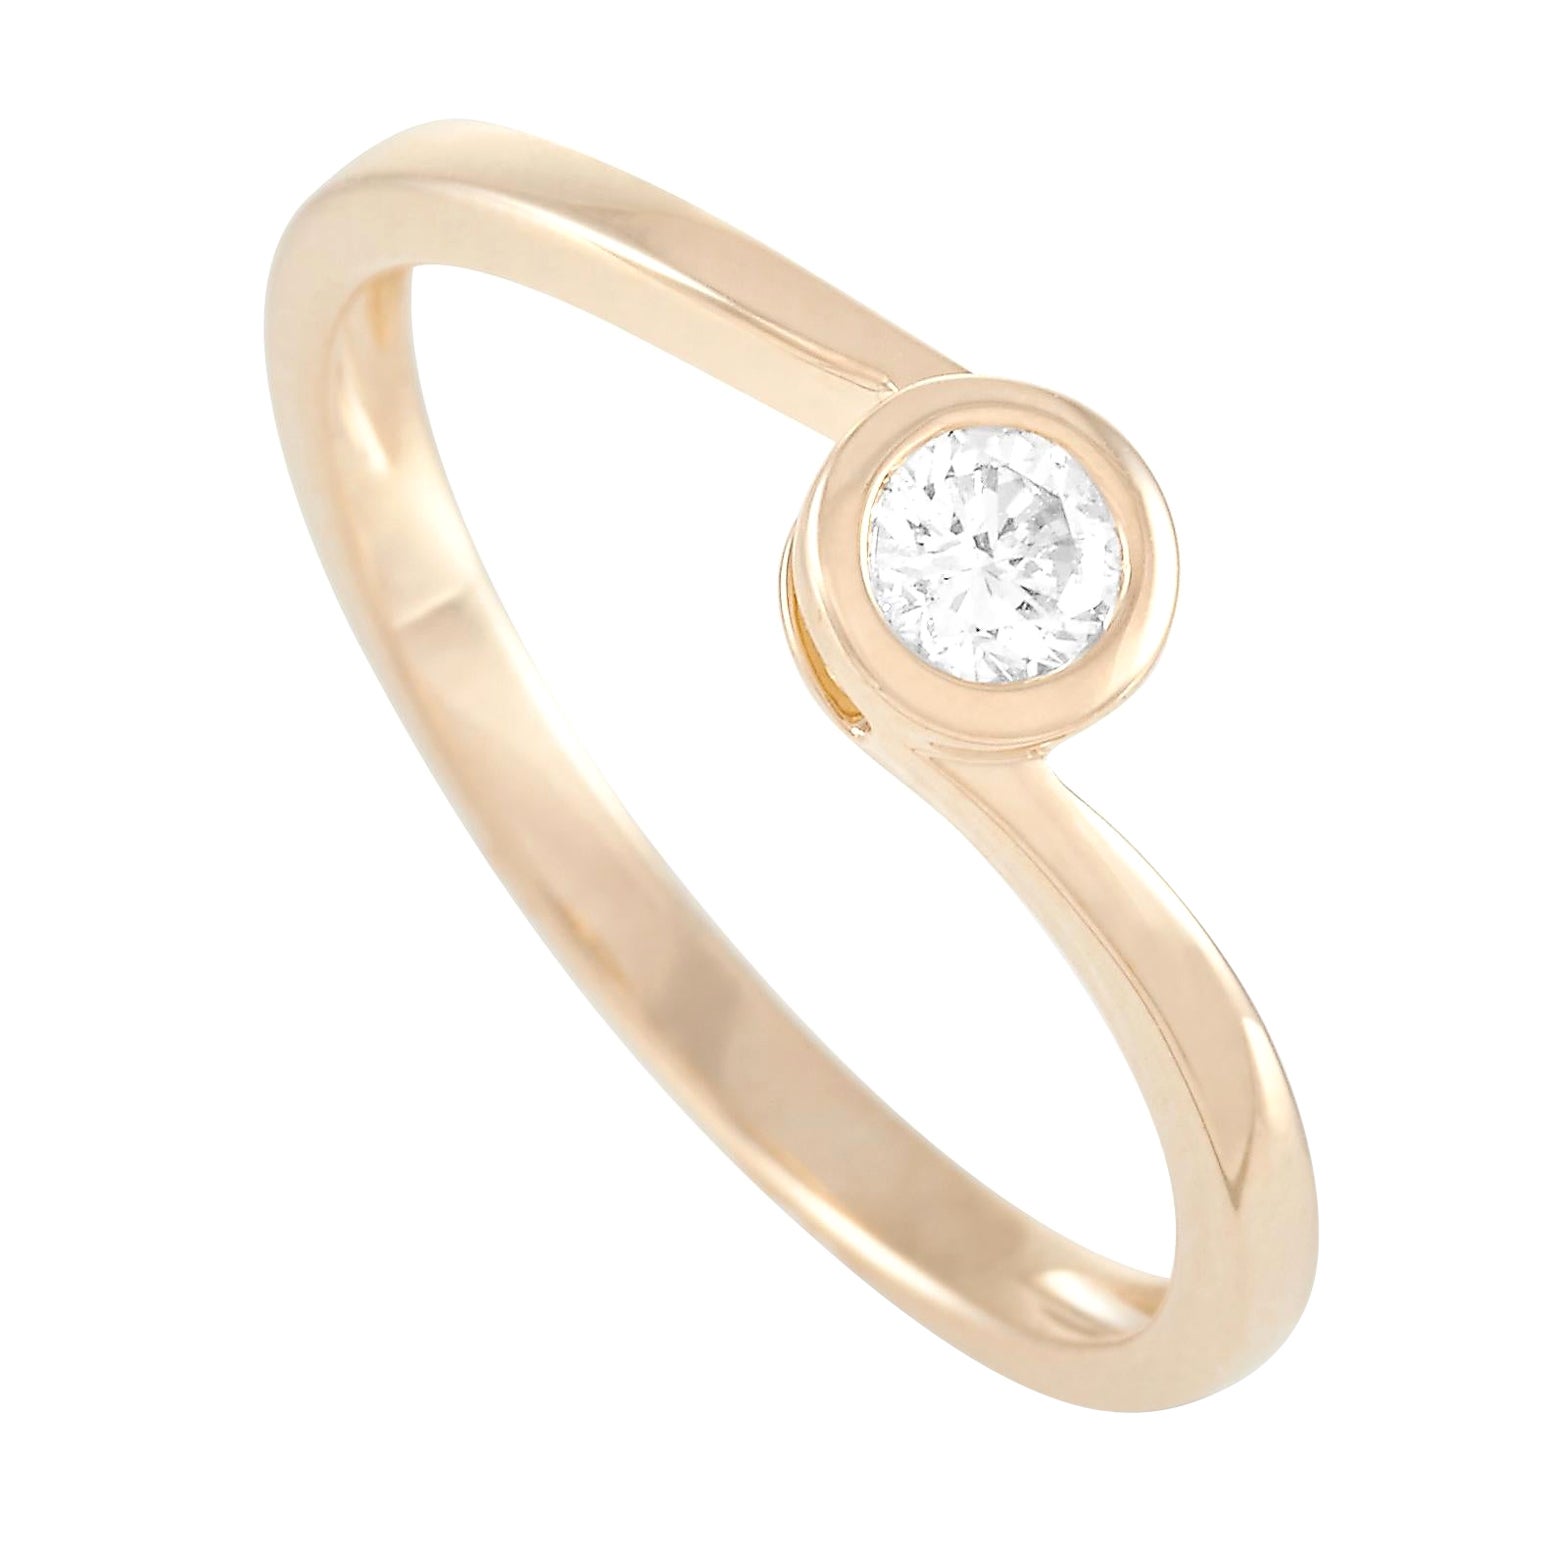 LB Exclusive 14K Yellow Gold 0.26 Ct Diamond Ring For Sale